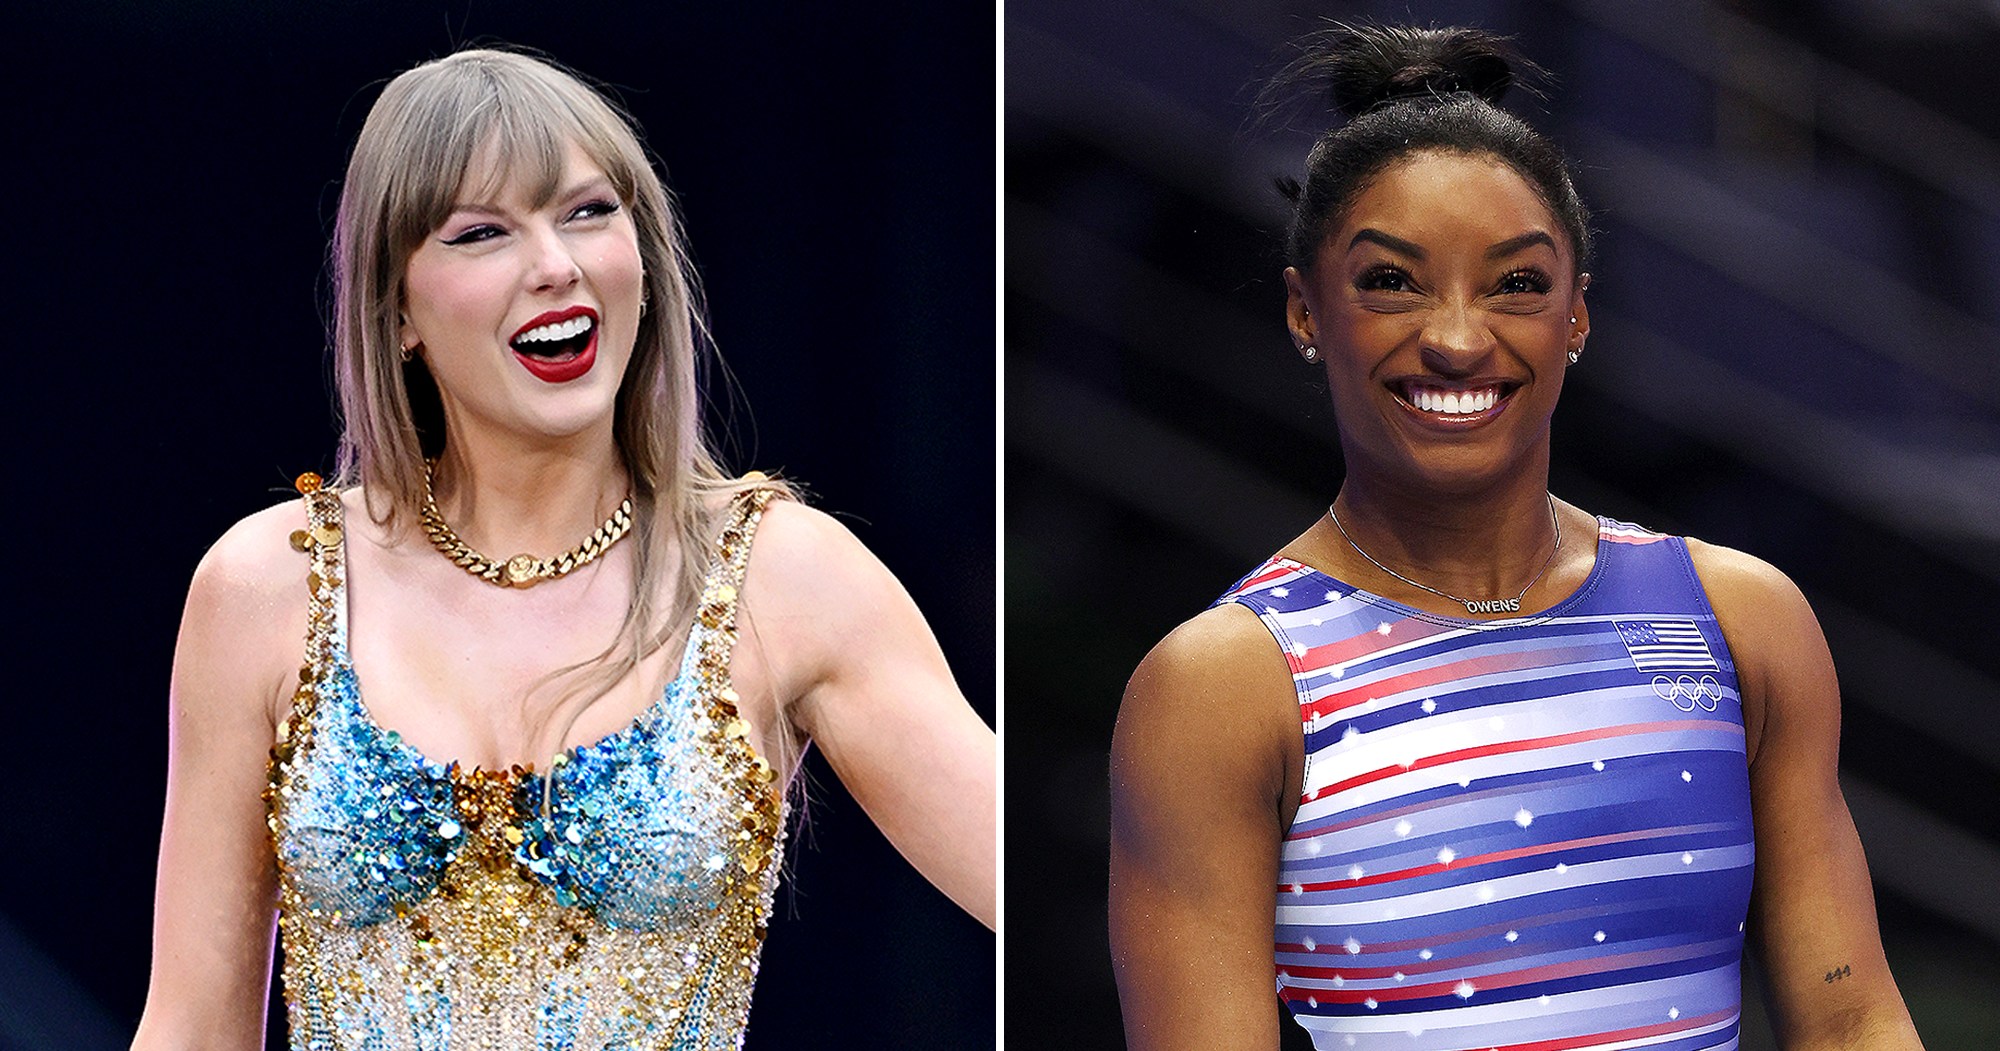 Taylor Swift Cheers on Simone Biles' Olympic Trials Routine: A Match Made in Gold